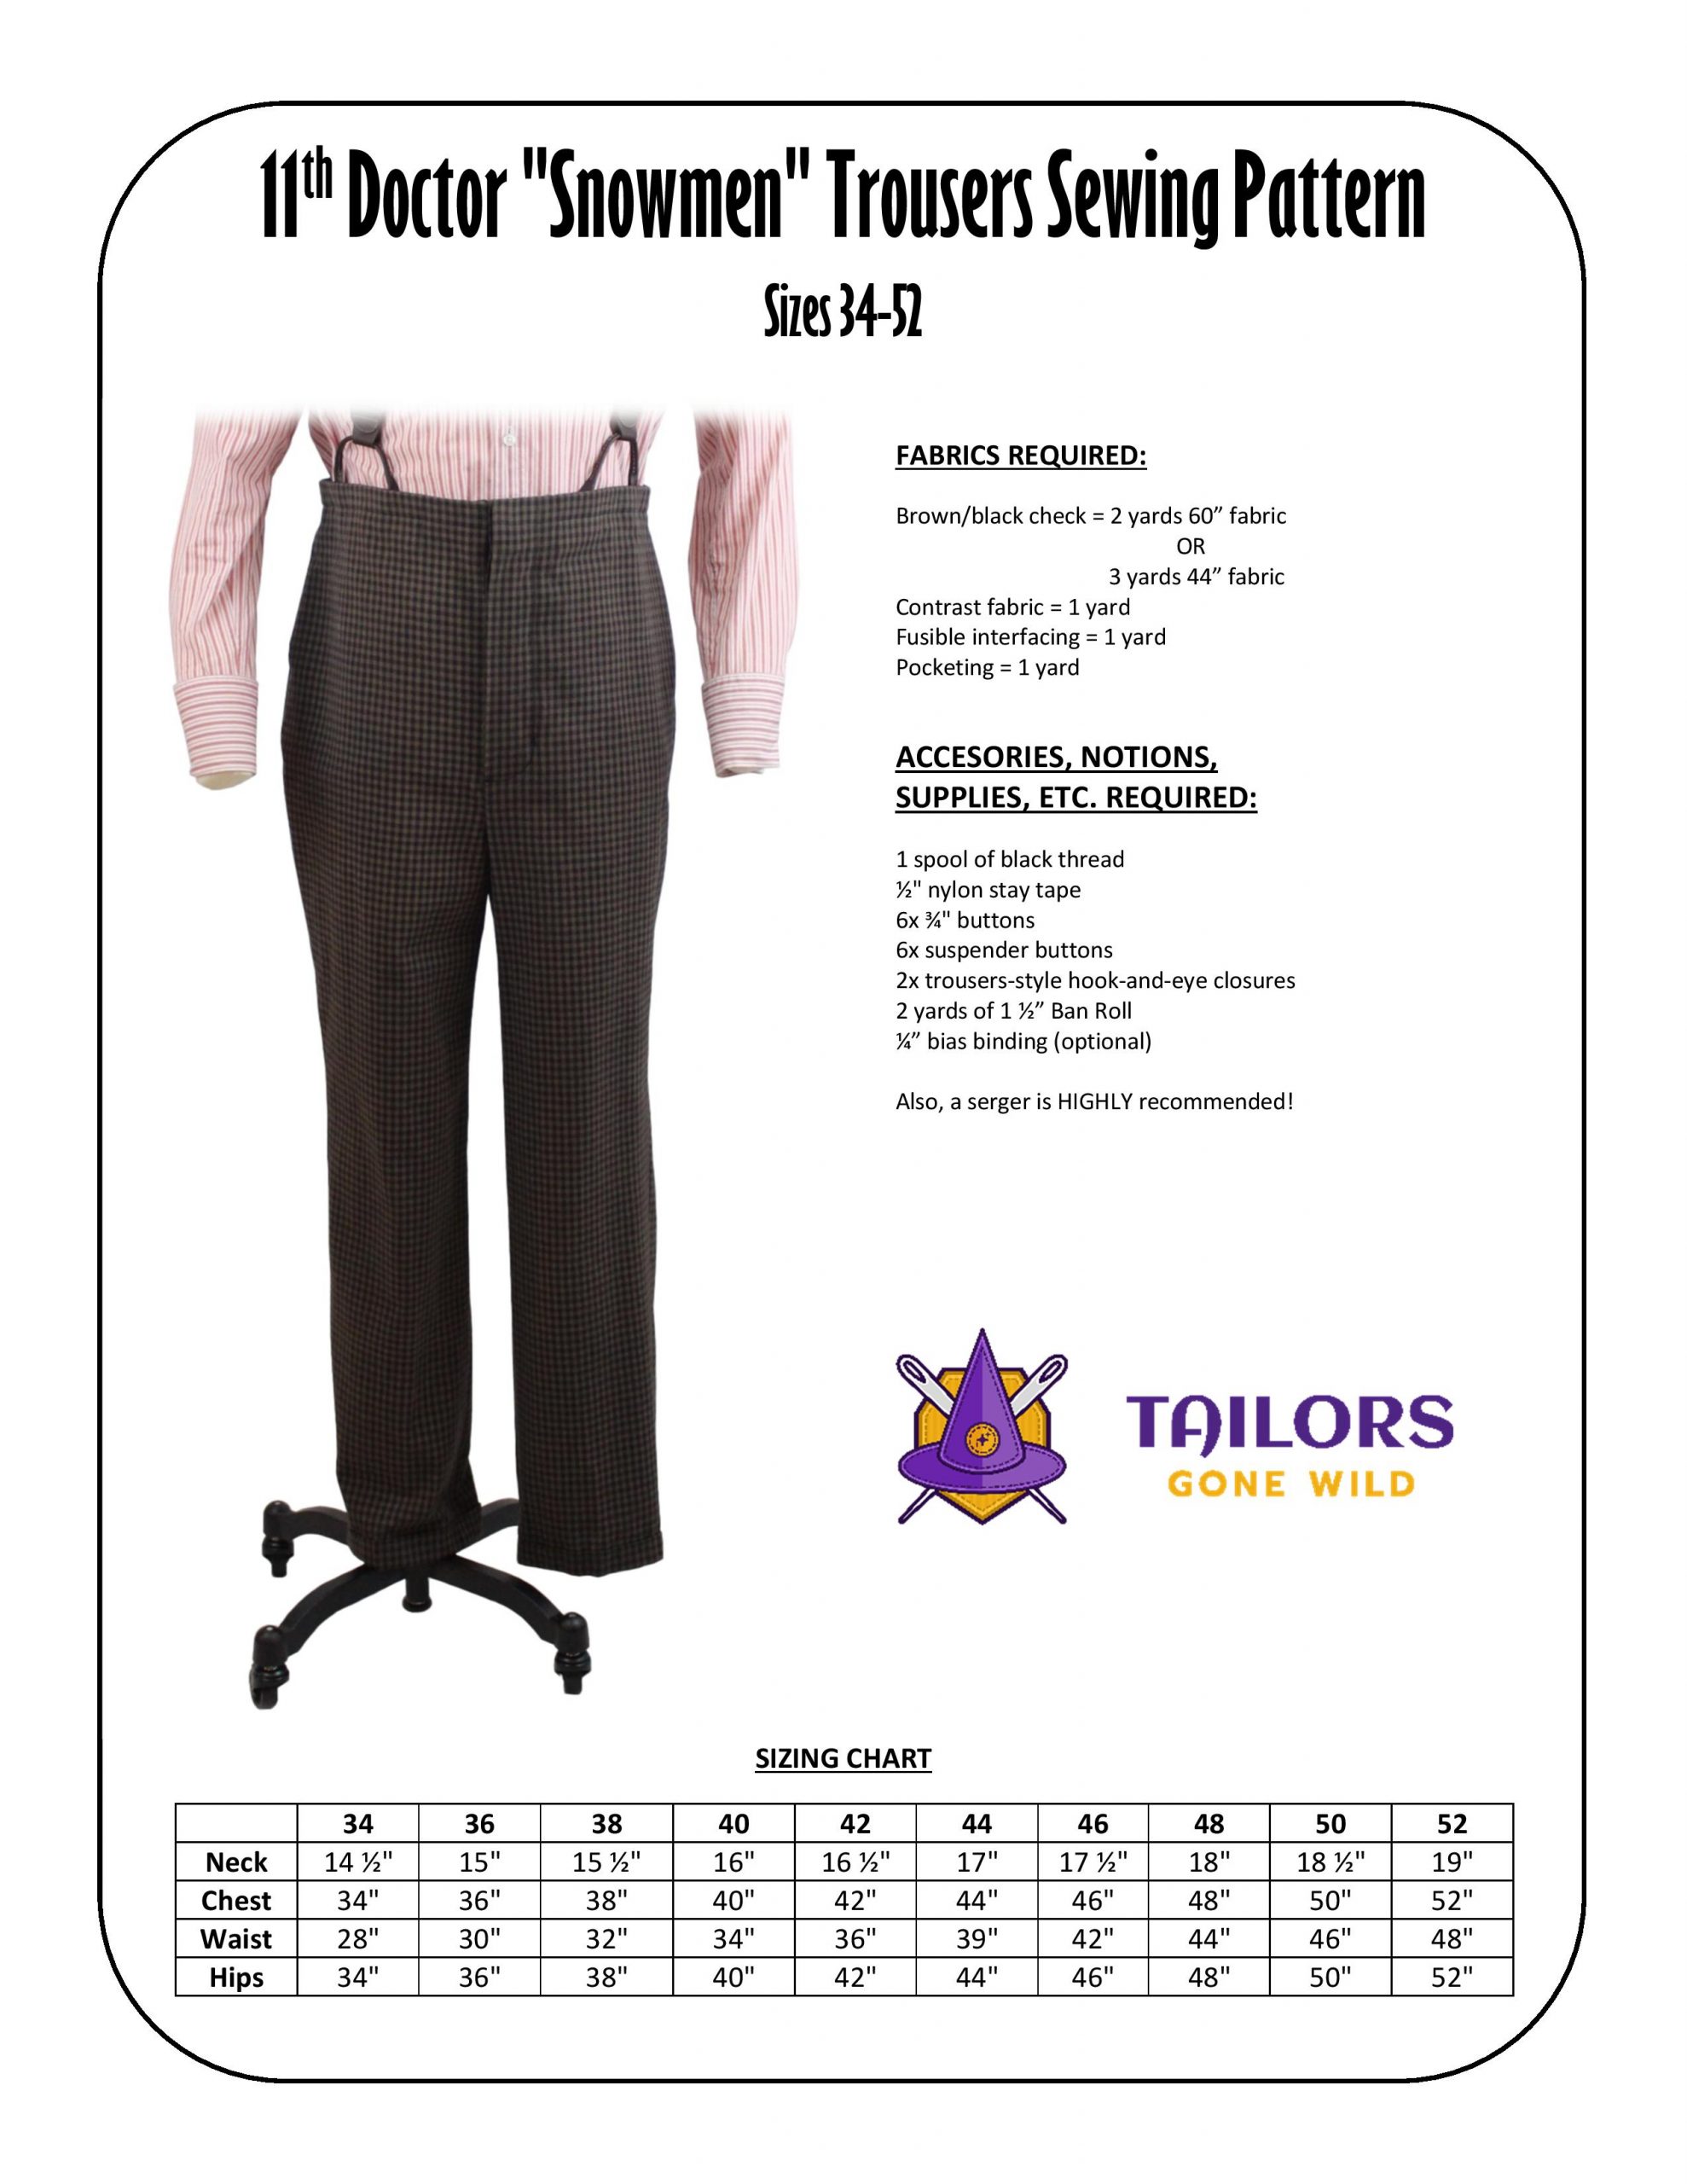 11th Doctor "Snowmen" trousers sewing pattern